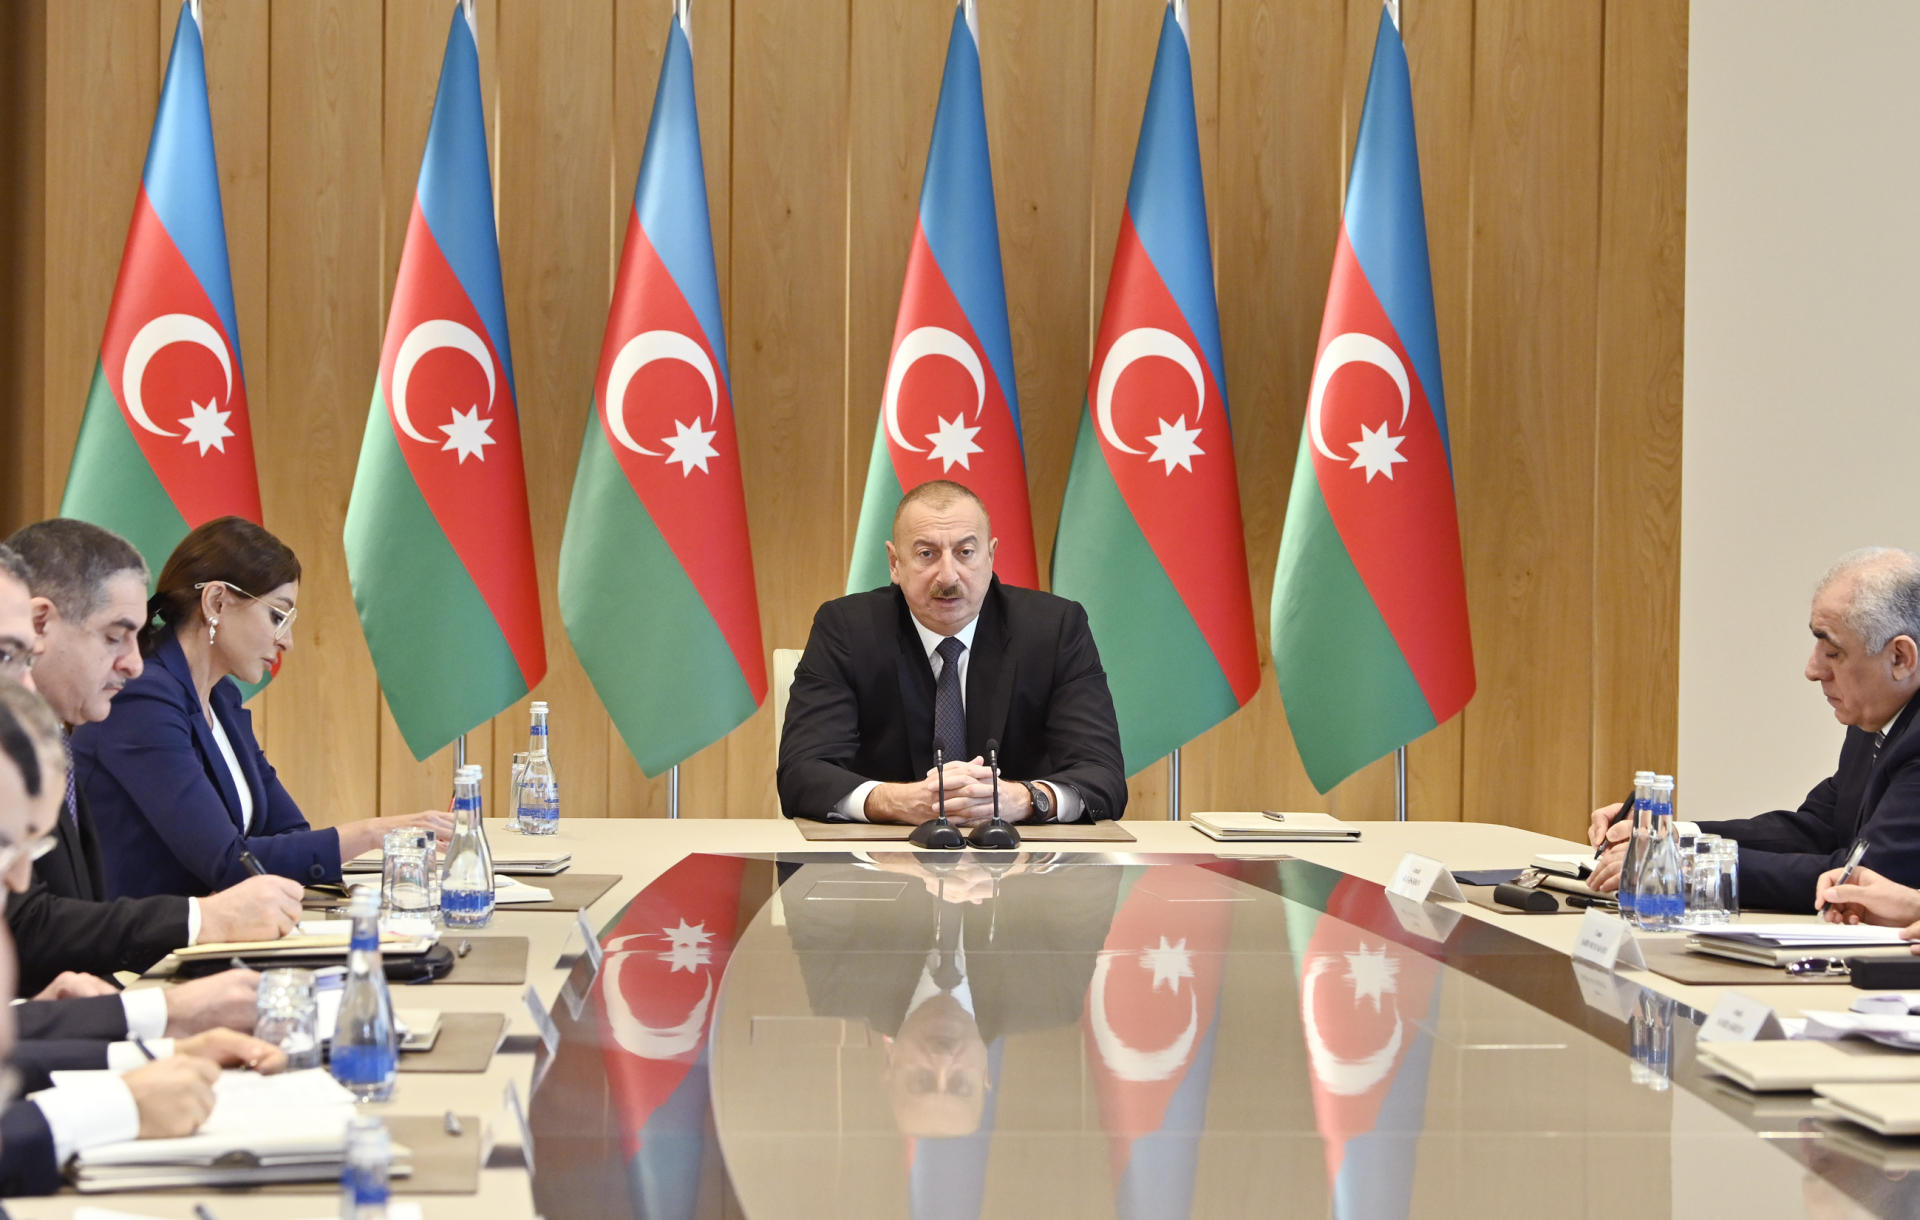 Ilham Aliyev: I am sure that 2020 will also be successful for our country